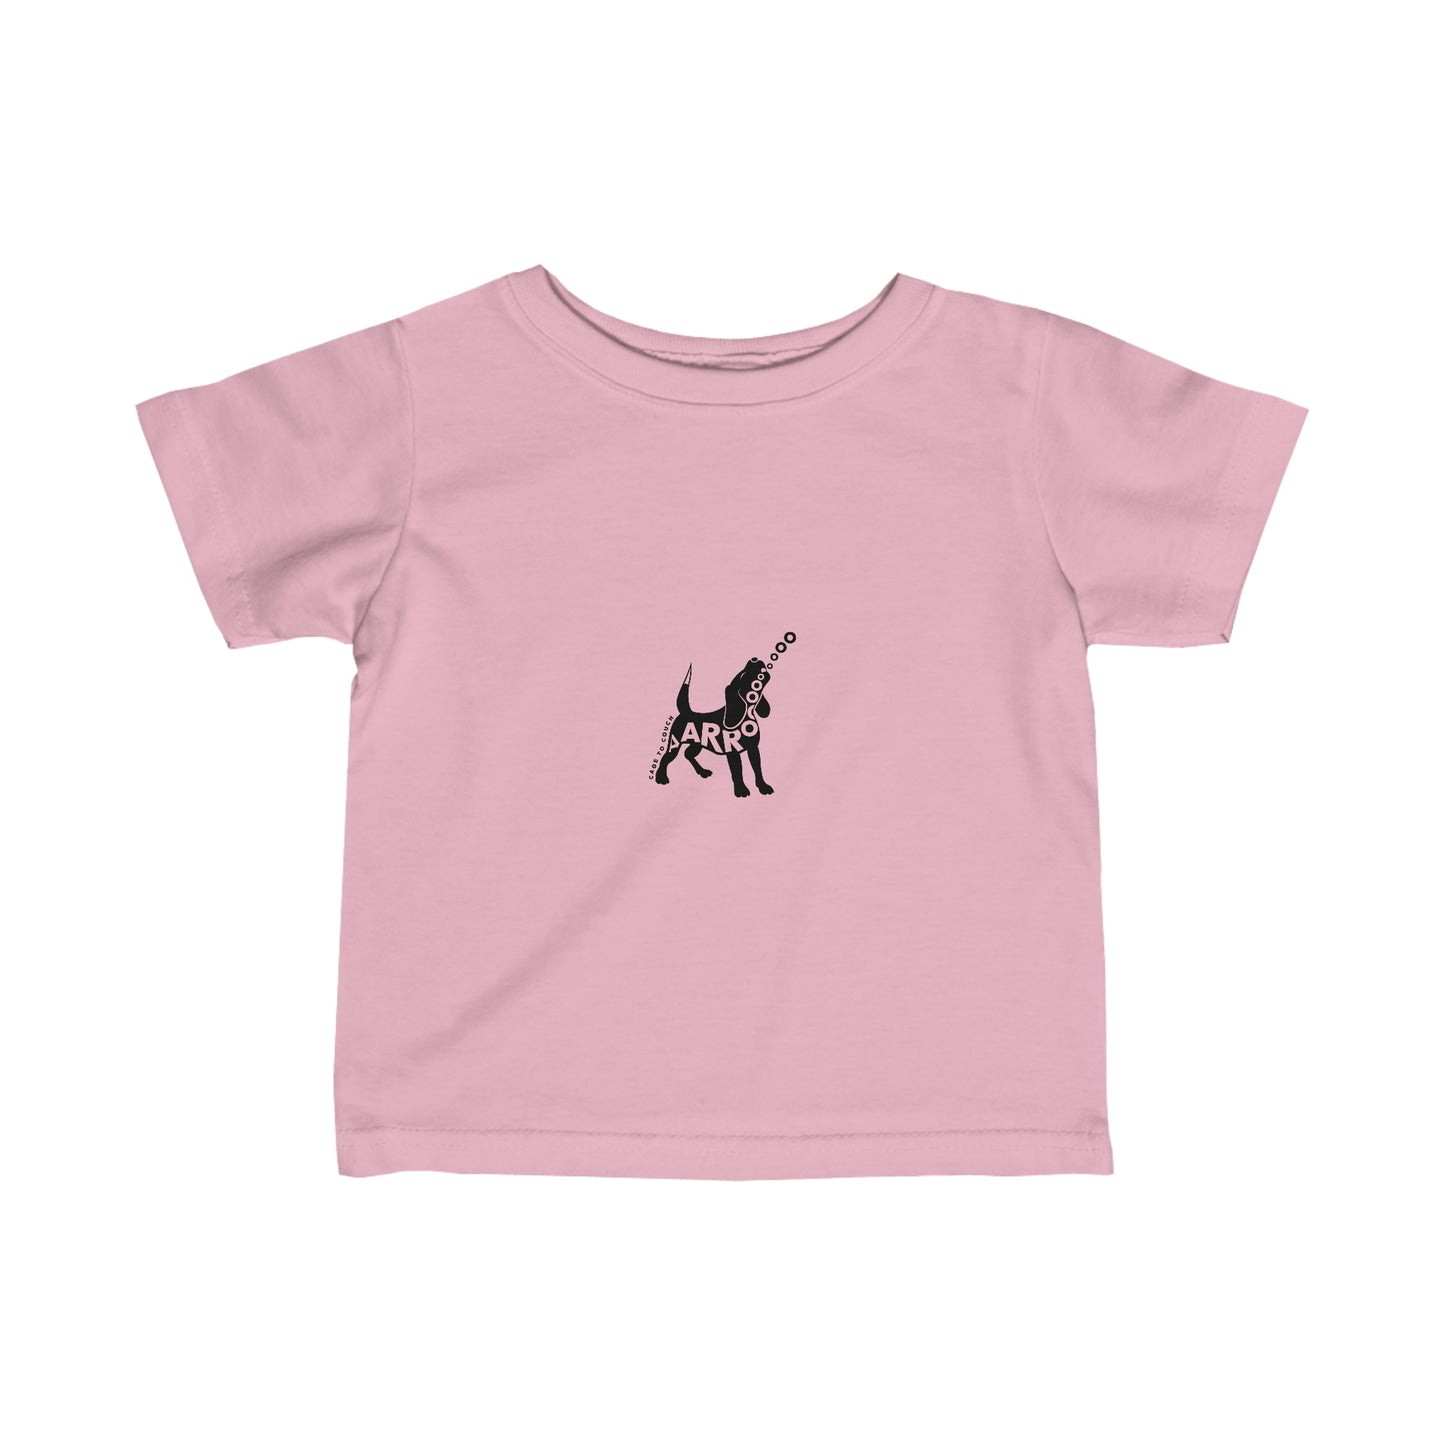 Arooo- If you know, you know! Infant Fine Jersey Tee